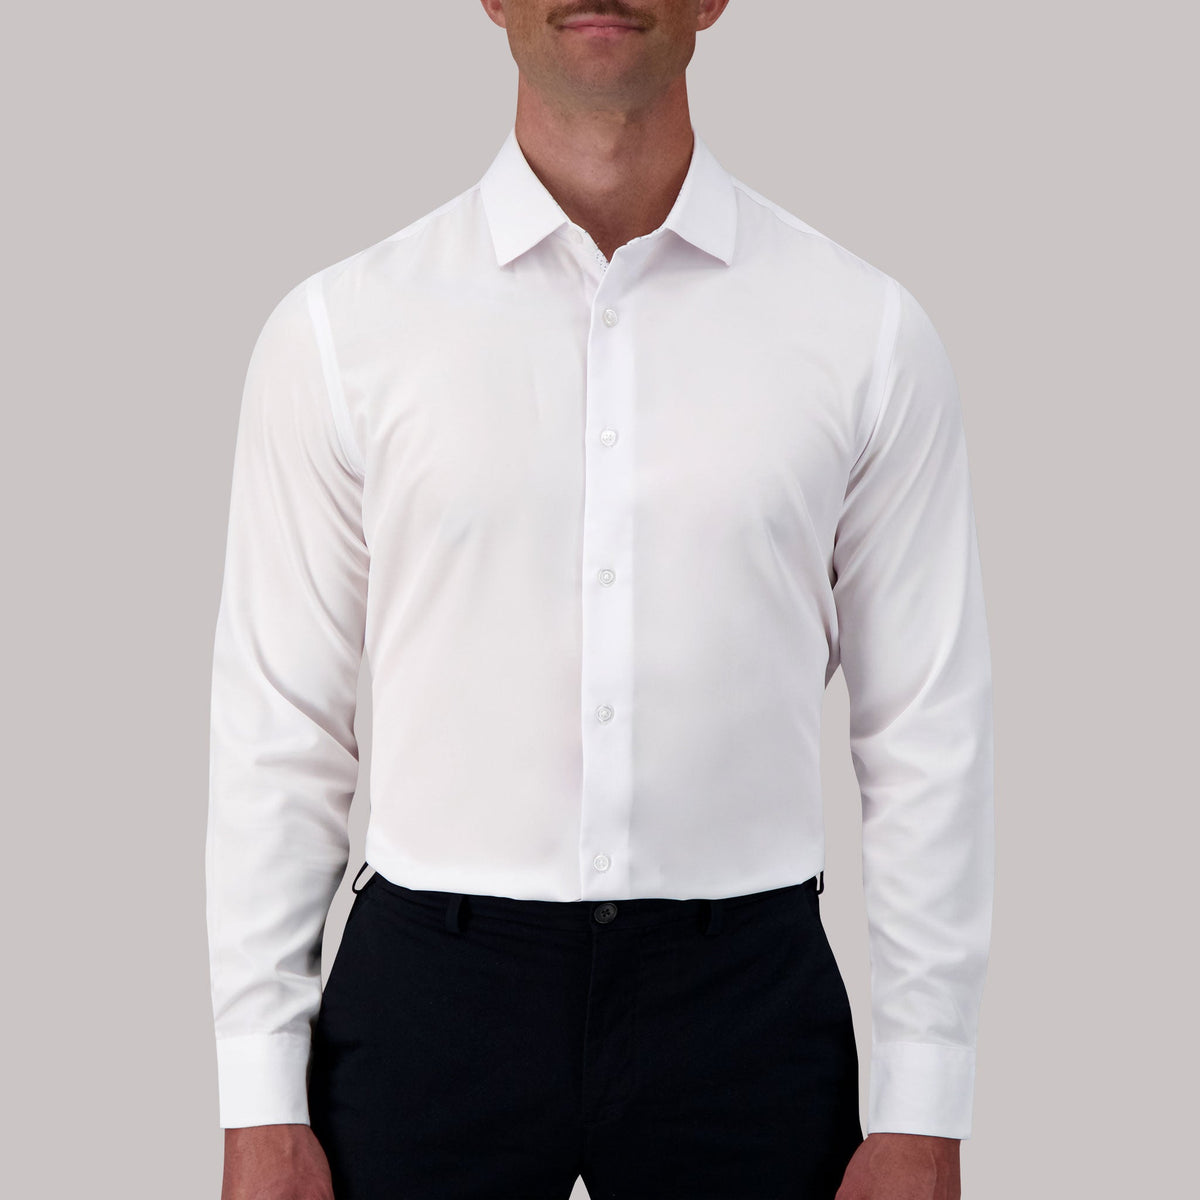 4-Way Stretch Dress Shirt 3-Pack in White